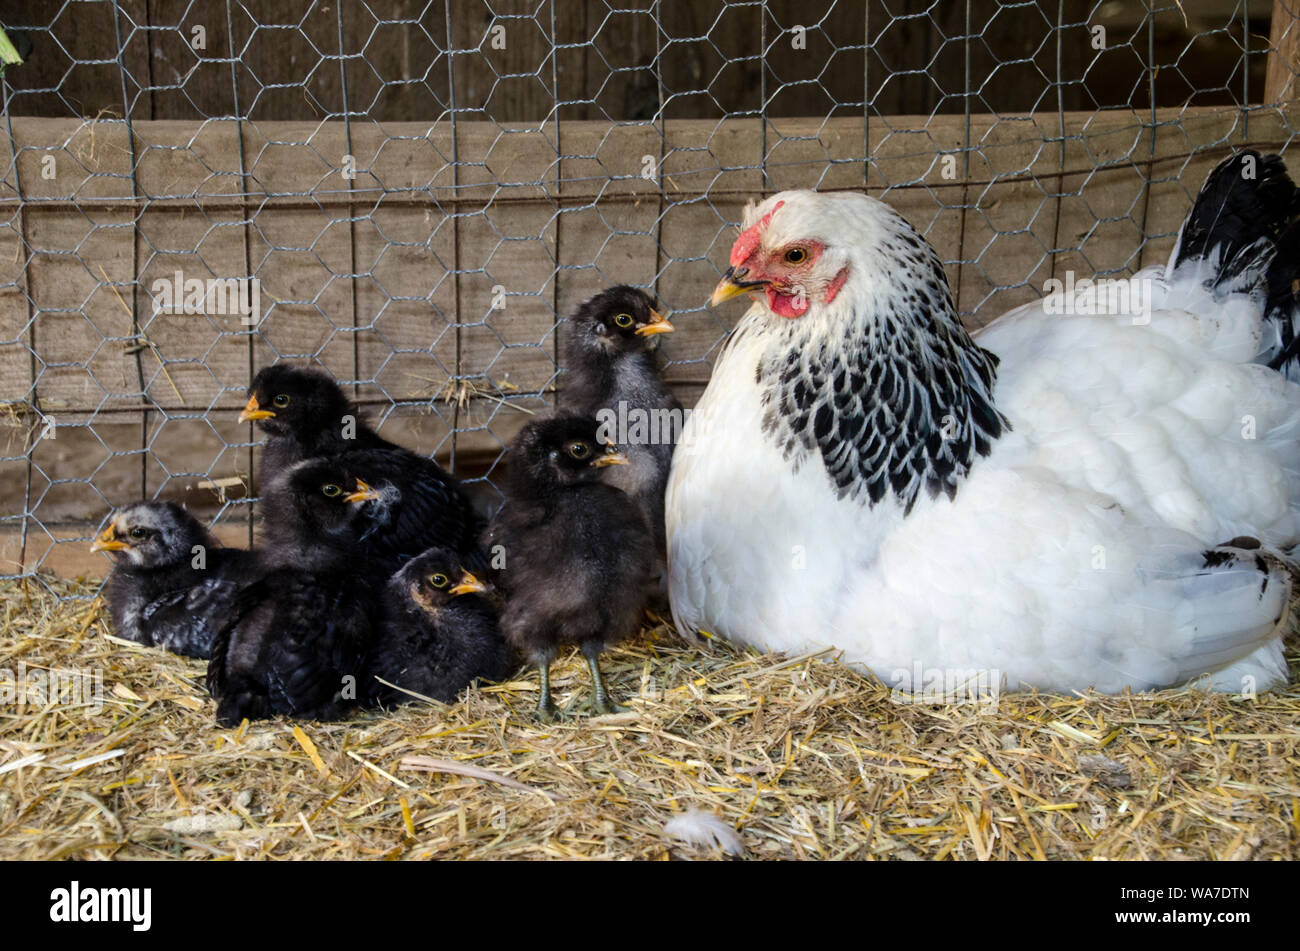 Mother Hen, Columbian Wyandotte, chicken with barnyard mix baby sitting together in cool afternoon shade in chicken coop Stock Photo